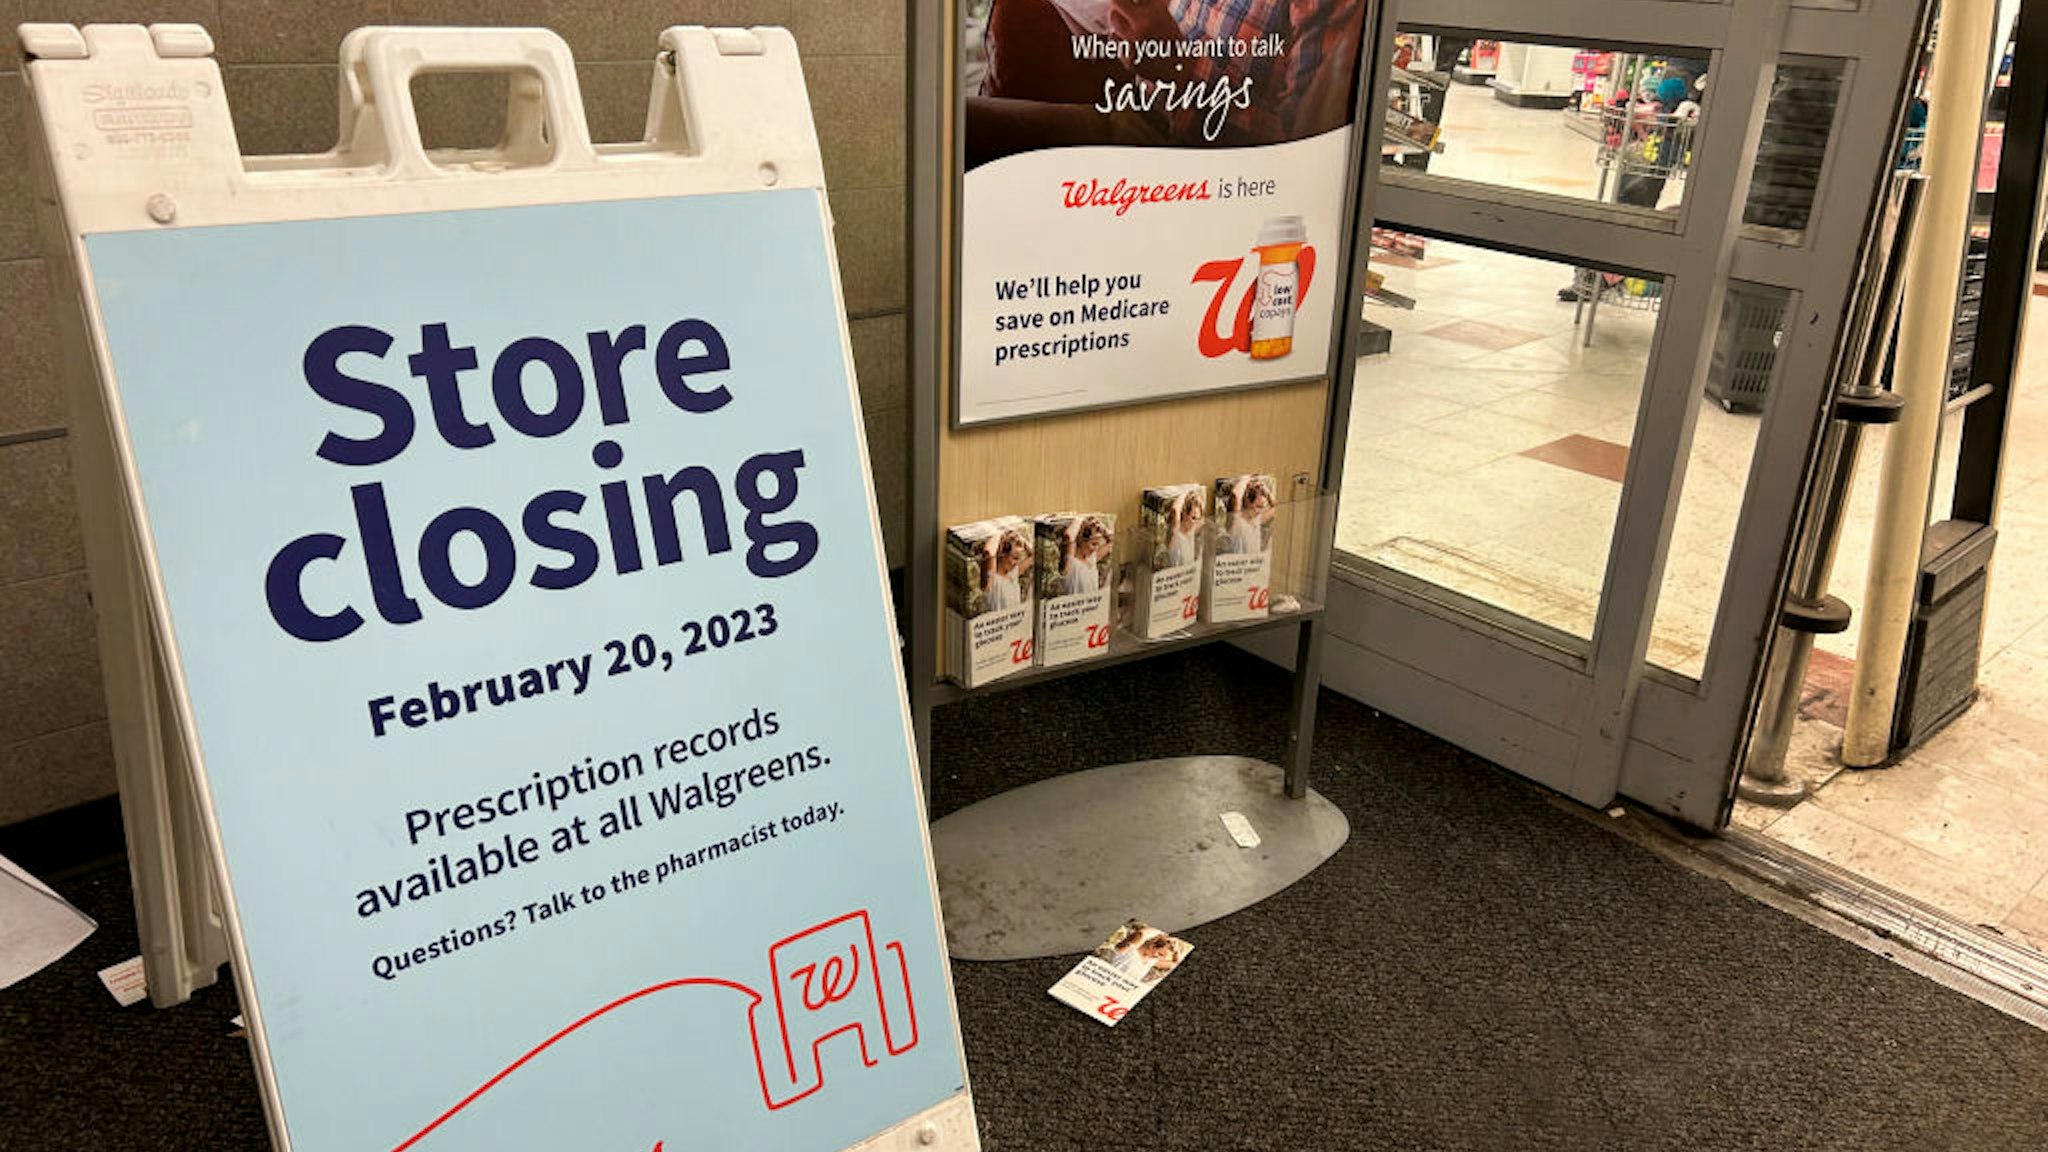 Walgreens Pharmacy and store closing sign at entrance, Queens, New York. (Photo by: Lindsey Nicholson/UCG/Universal Images Group via Getty Images)